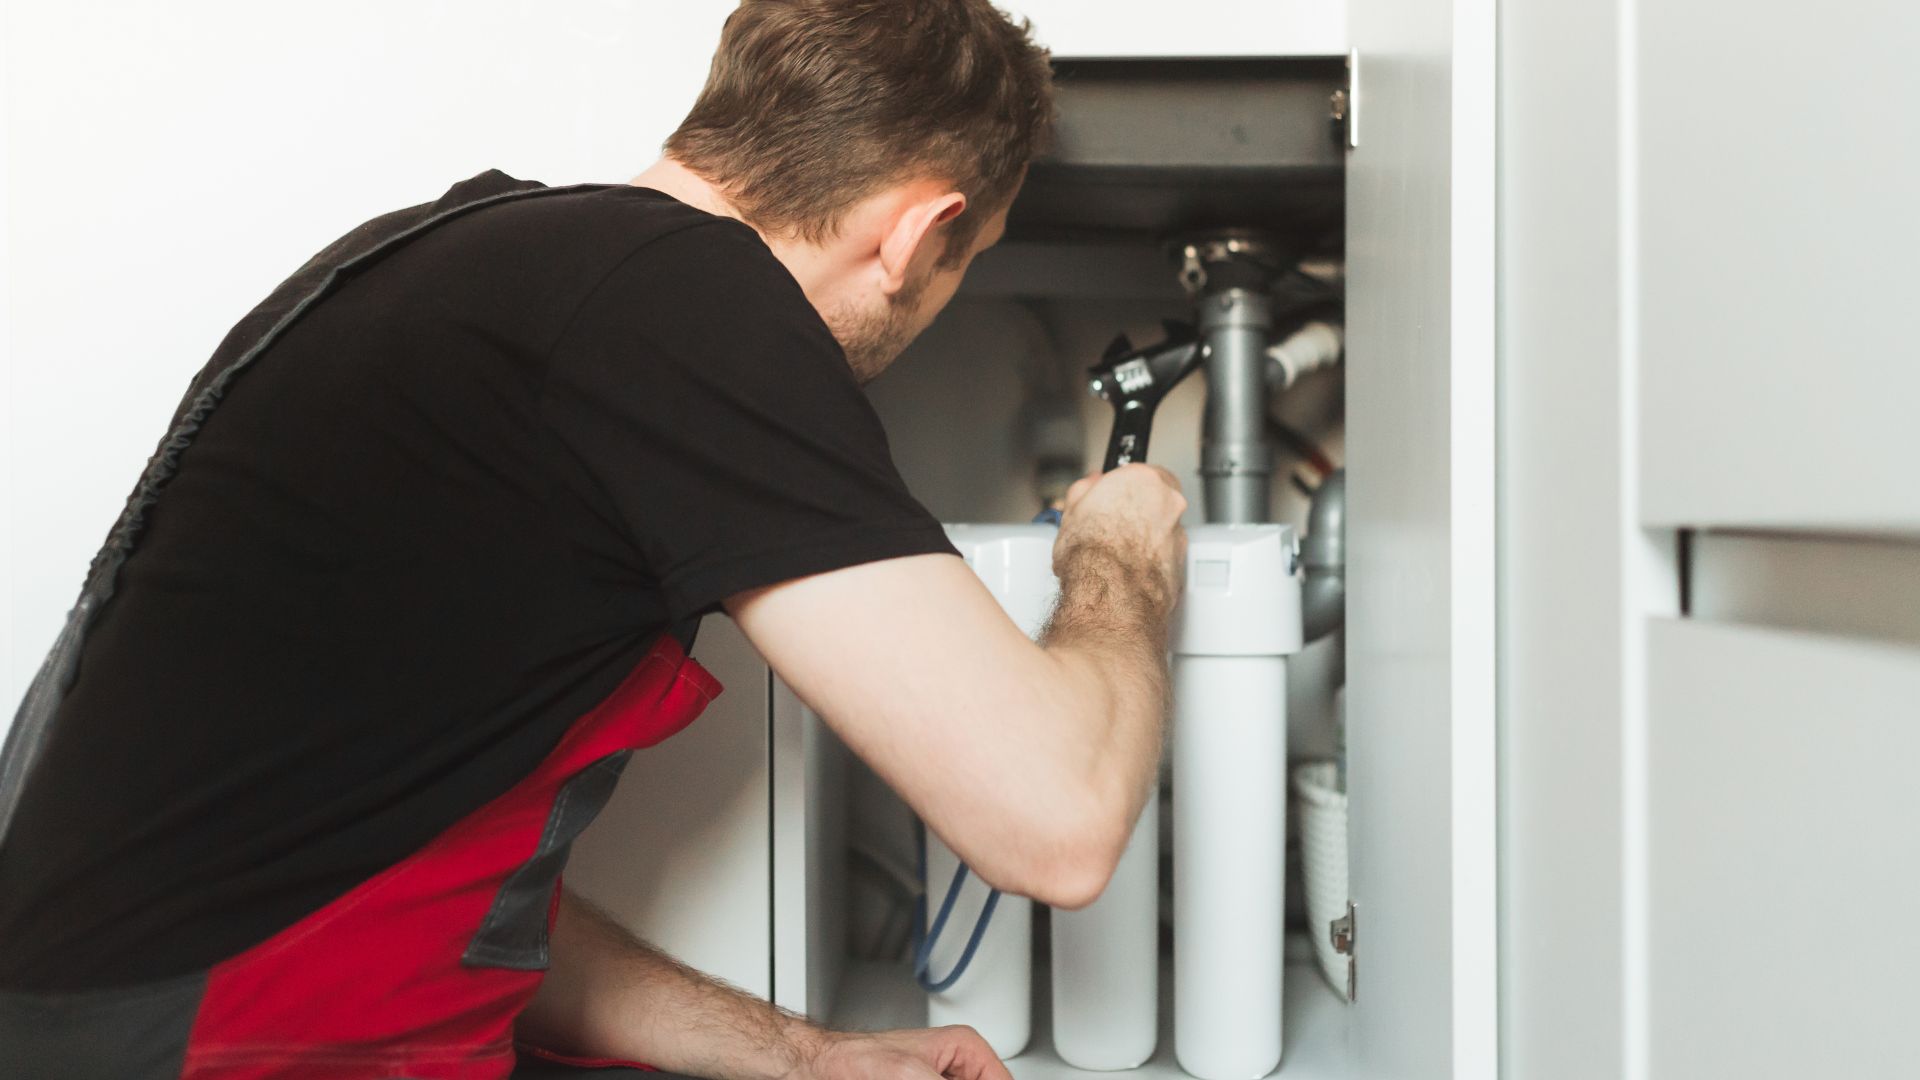 For all your water filtration requirements, get in touch with CAN Plumbing and Drainage, specializing in plumbing services.